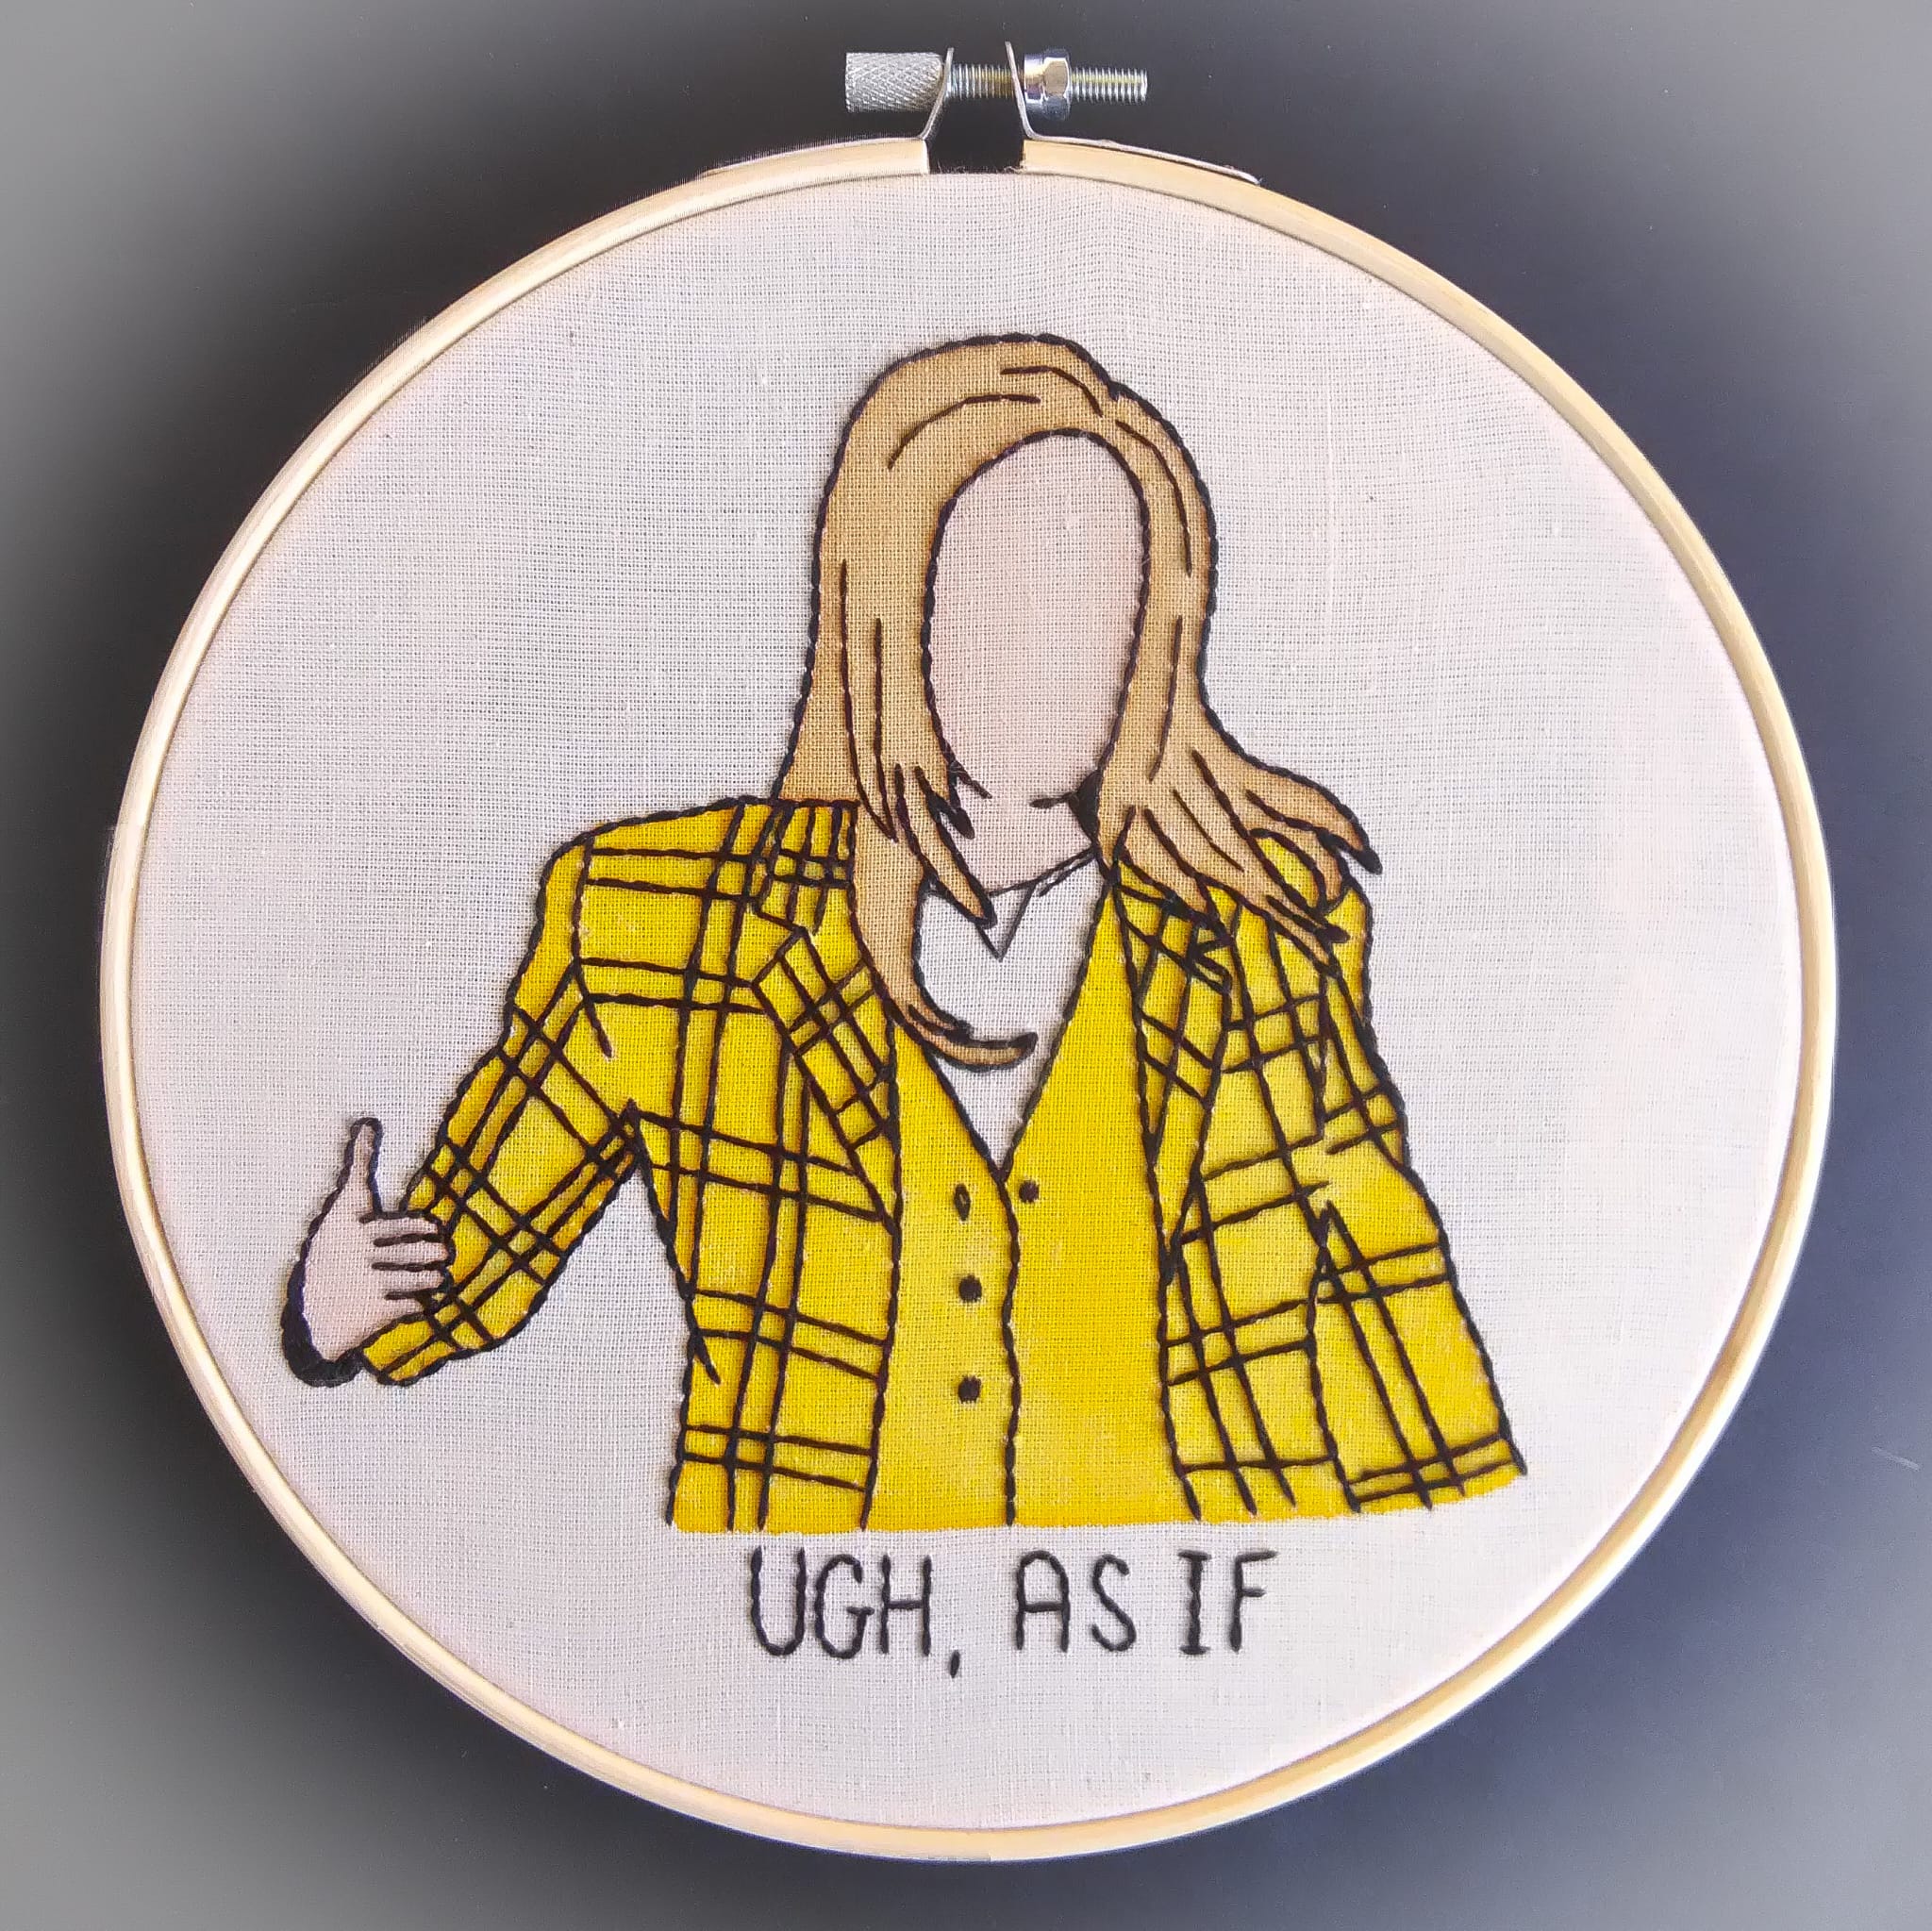 Upright wanted to share some of my 90s-impressed embroideries